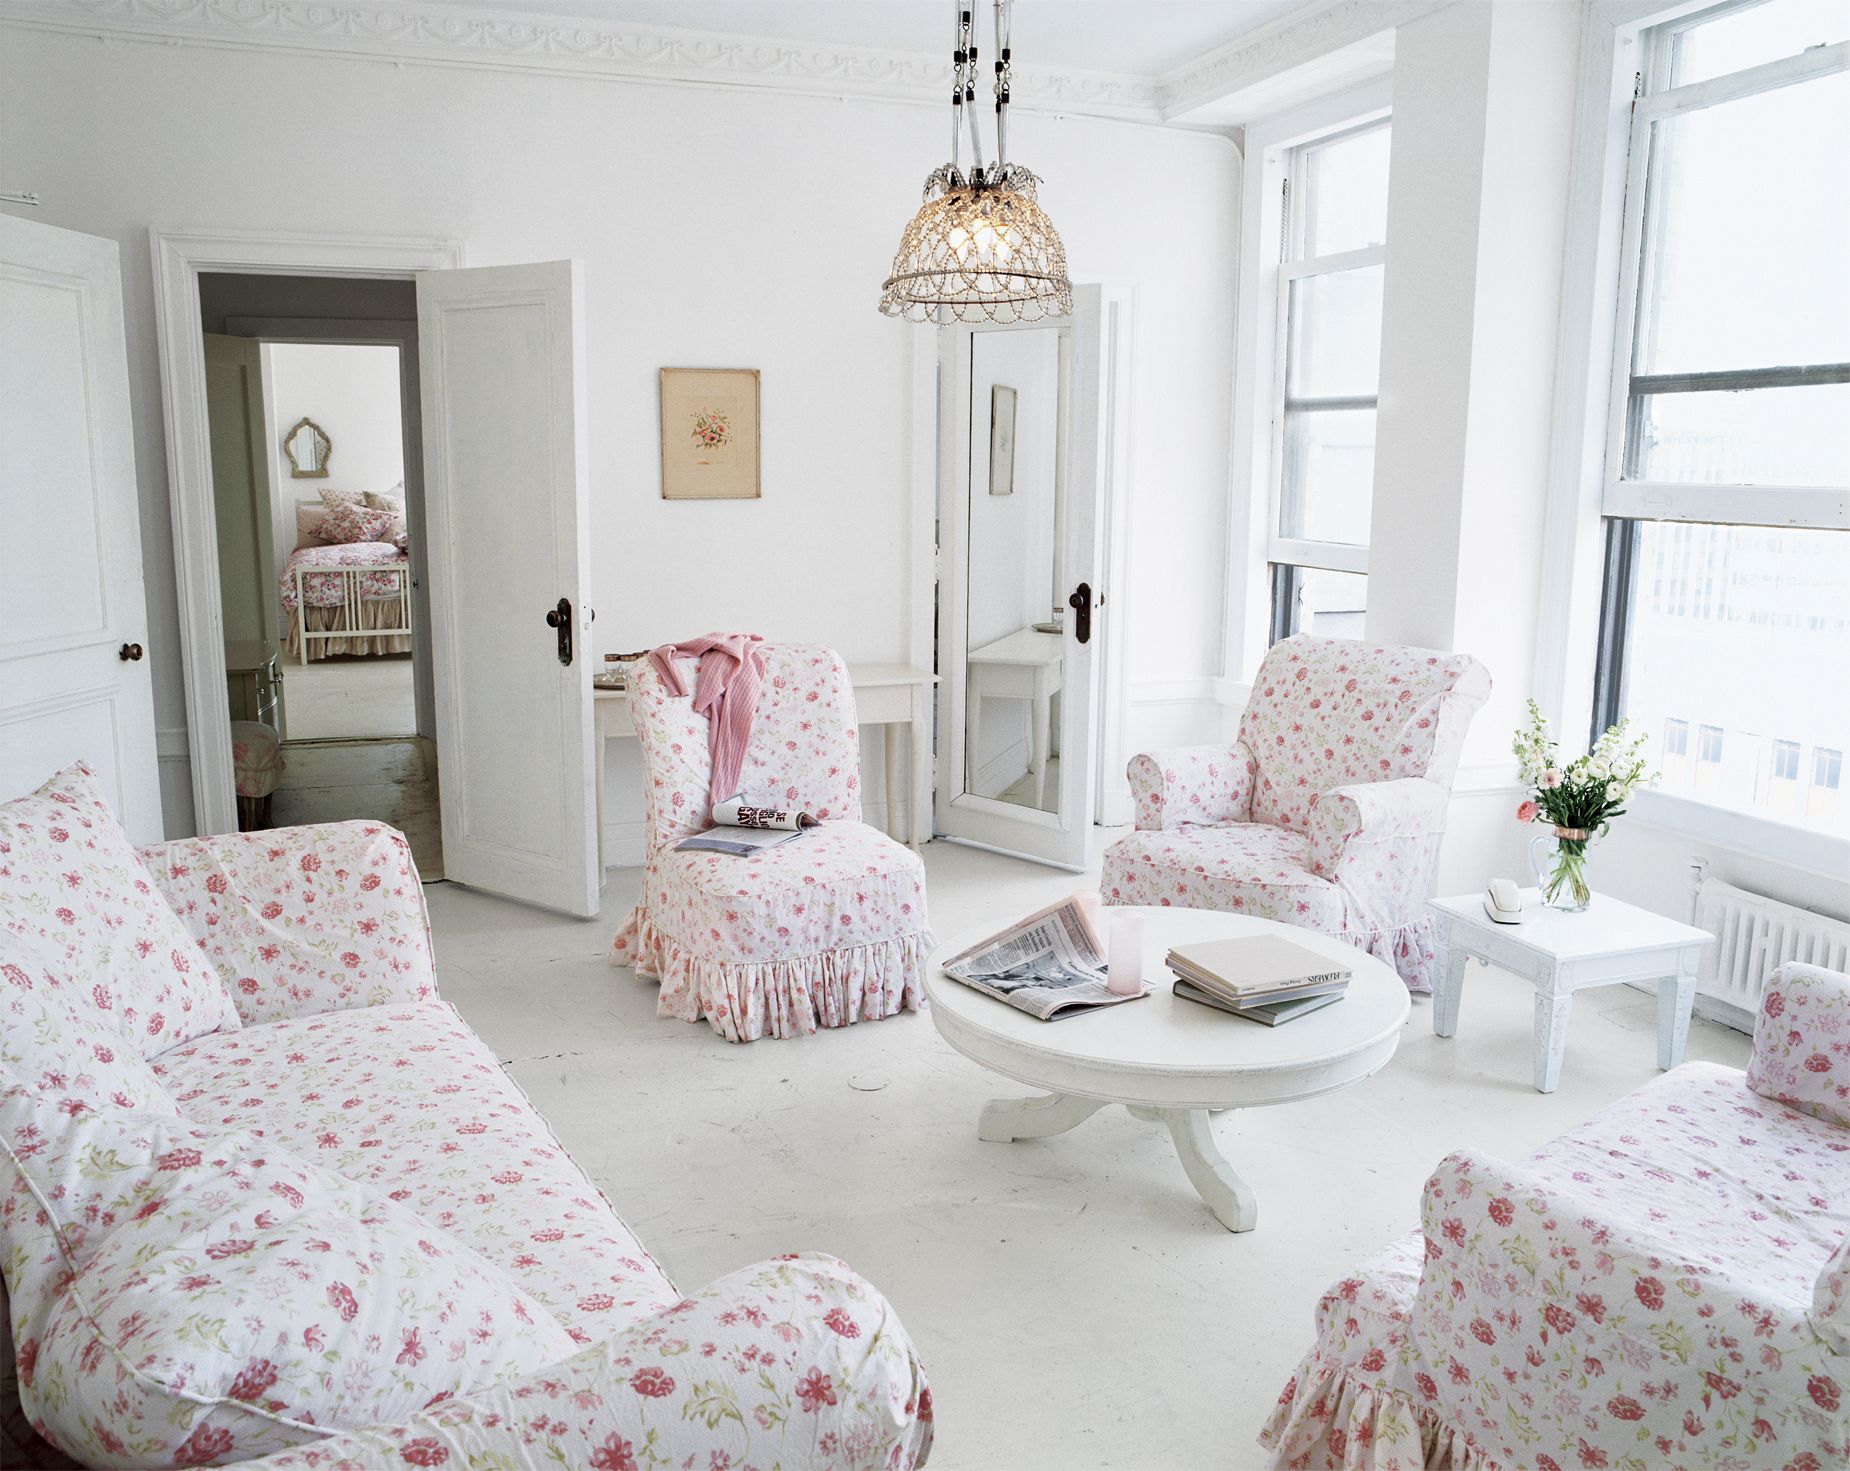 9 Ways To Infuse Designer Rachel Ashwell S Shabby Chic Style Into Your Life Her Favorite Fabrics Paints And More